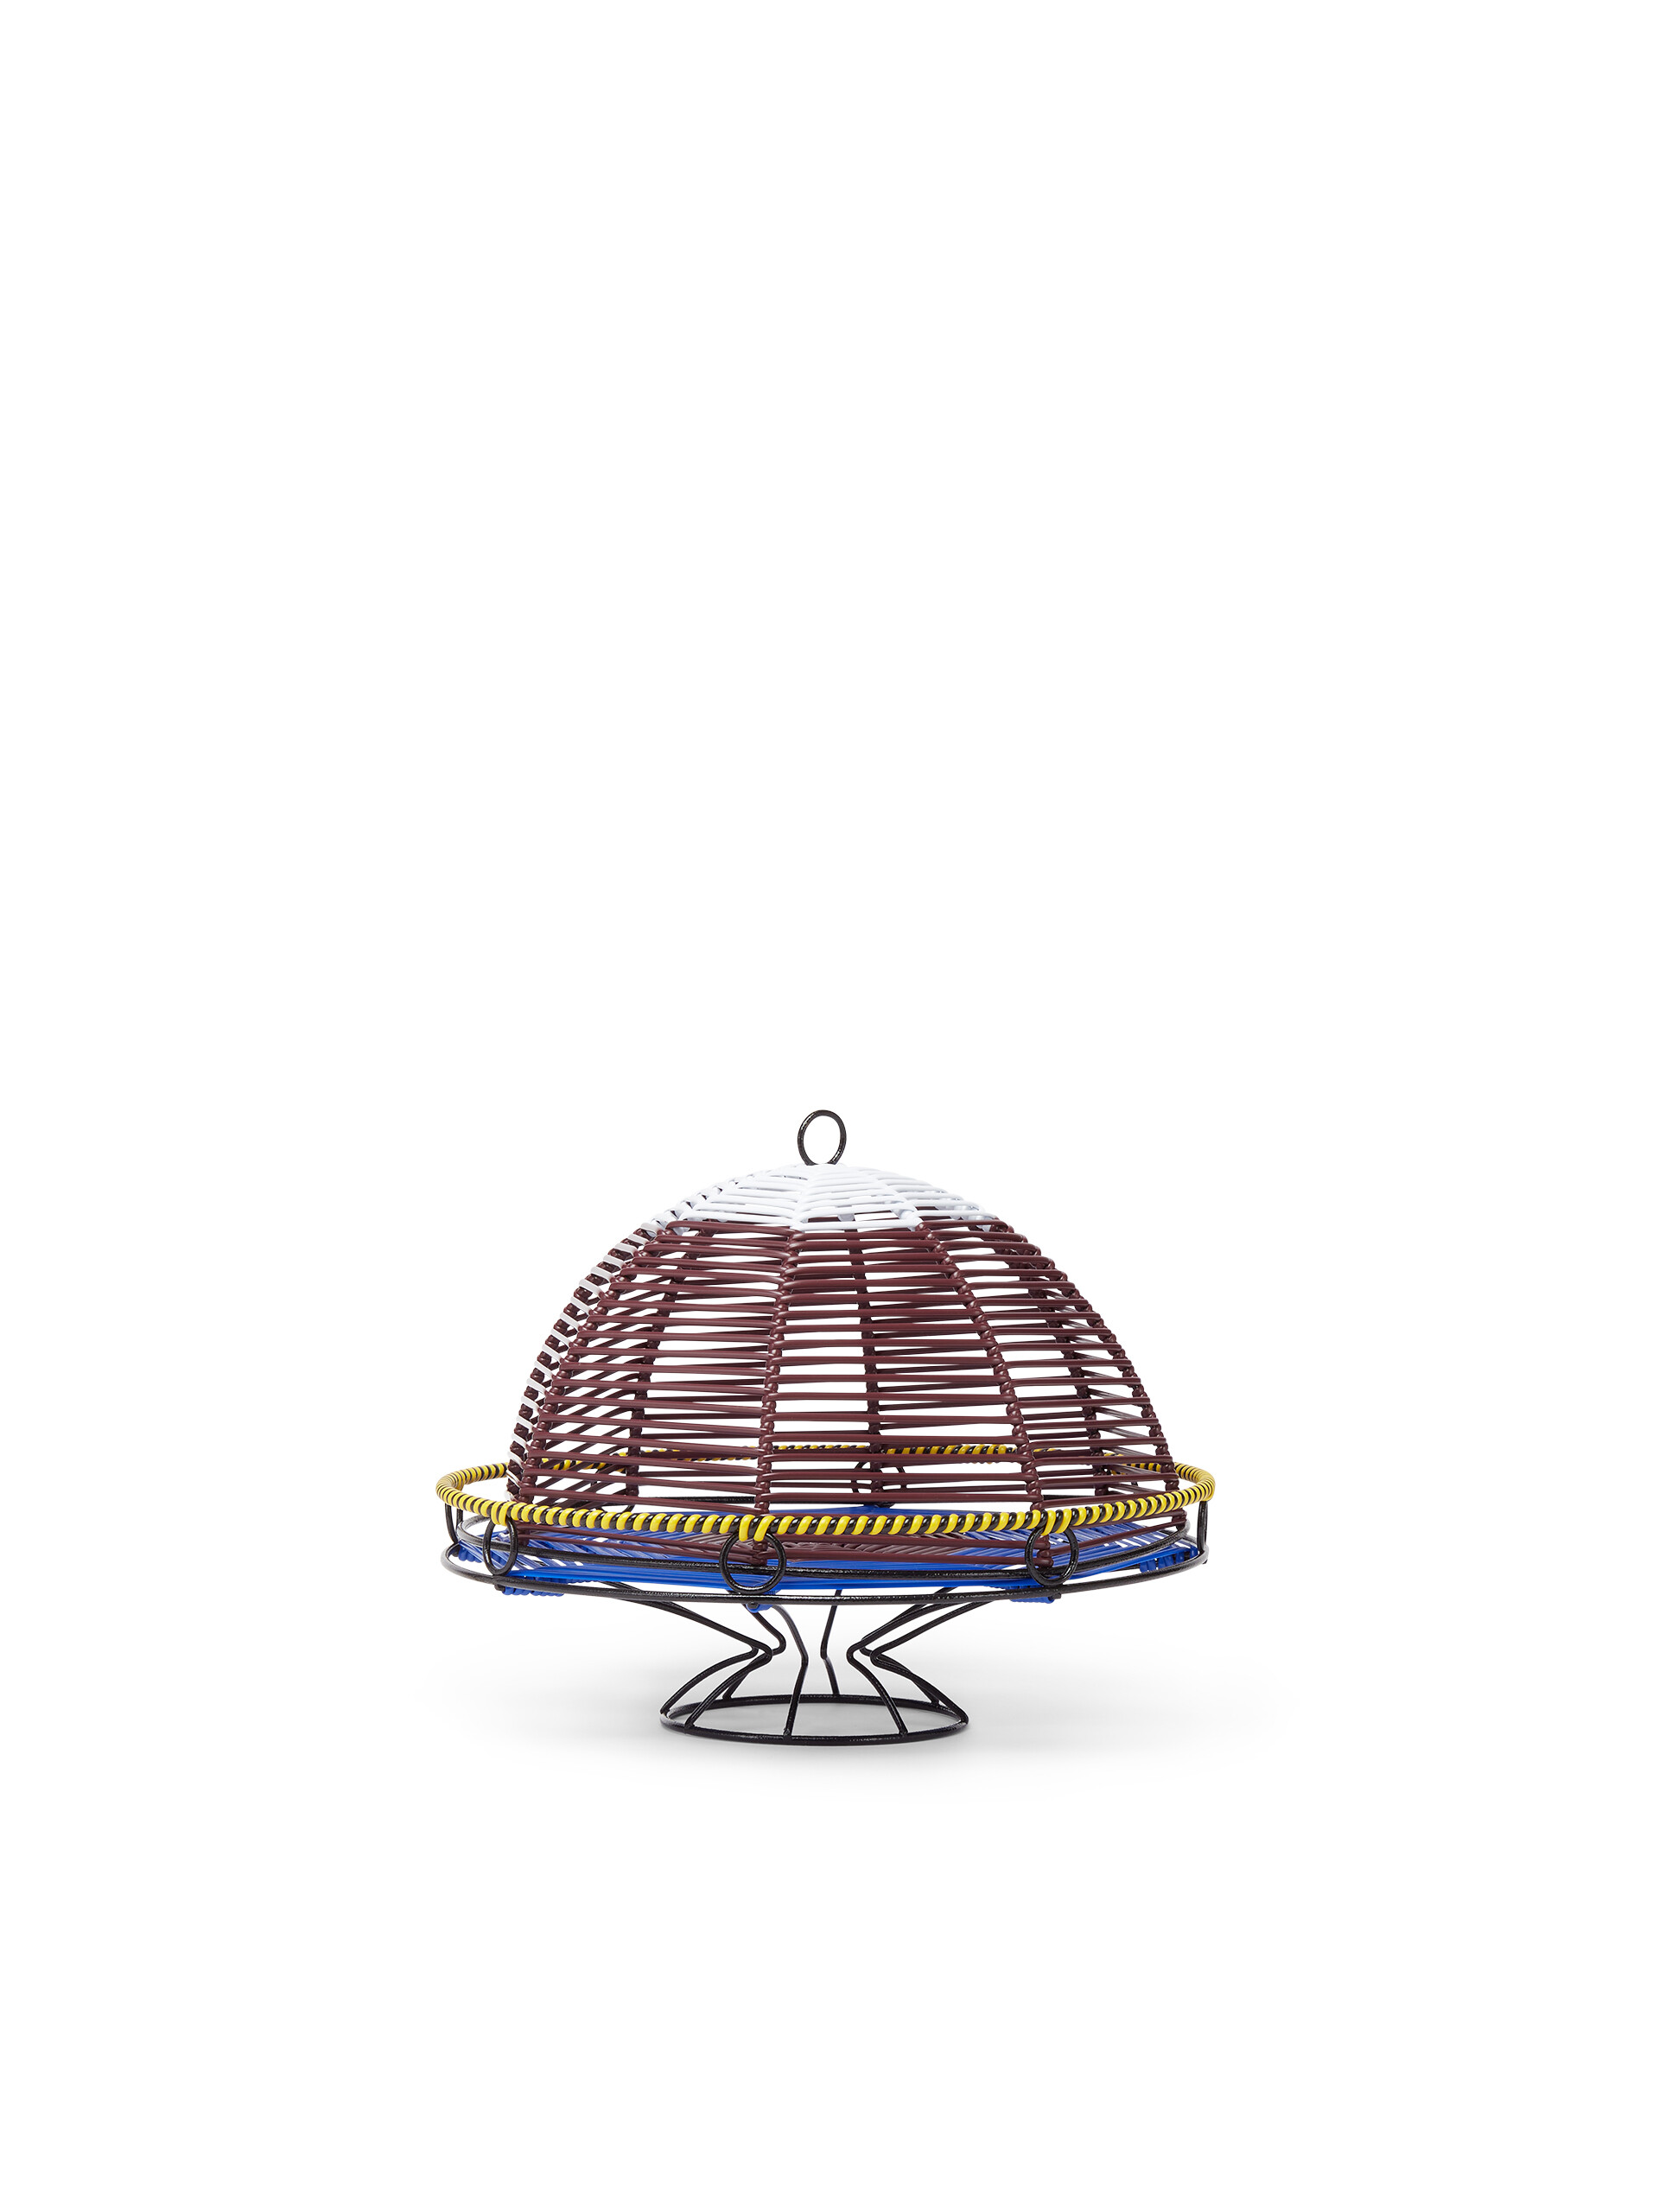 MARNI MARKET brown and blue cake stand - Accessories - Image 2